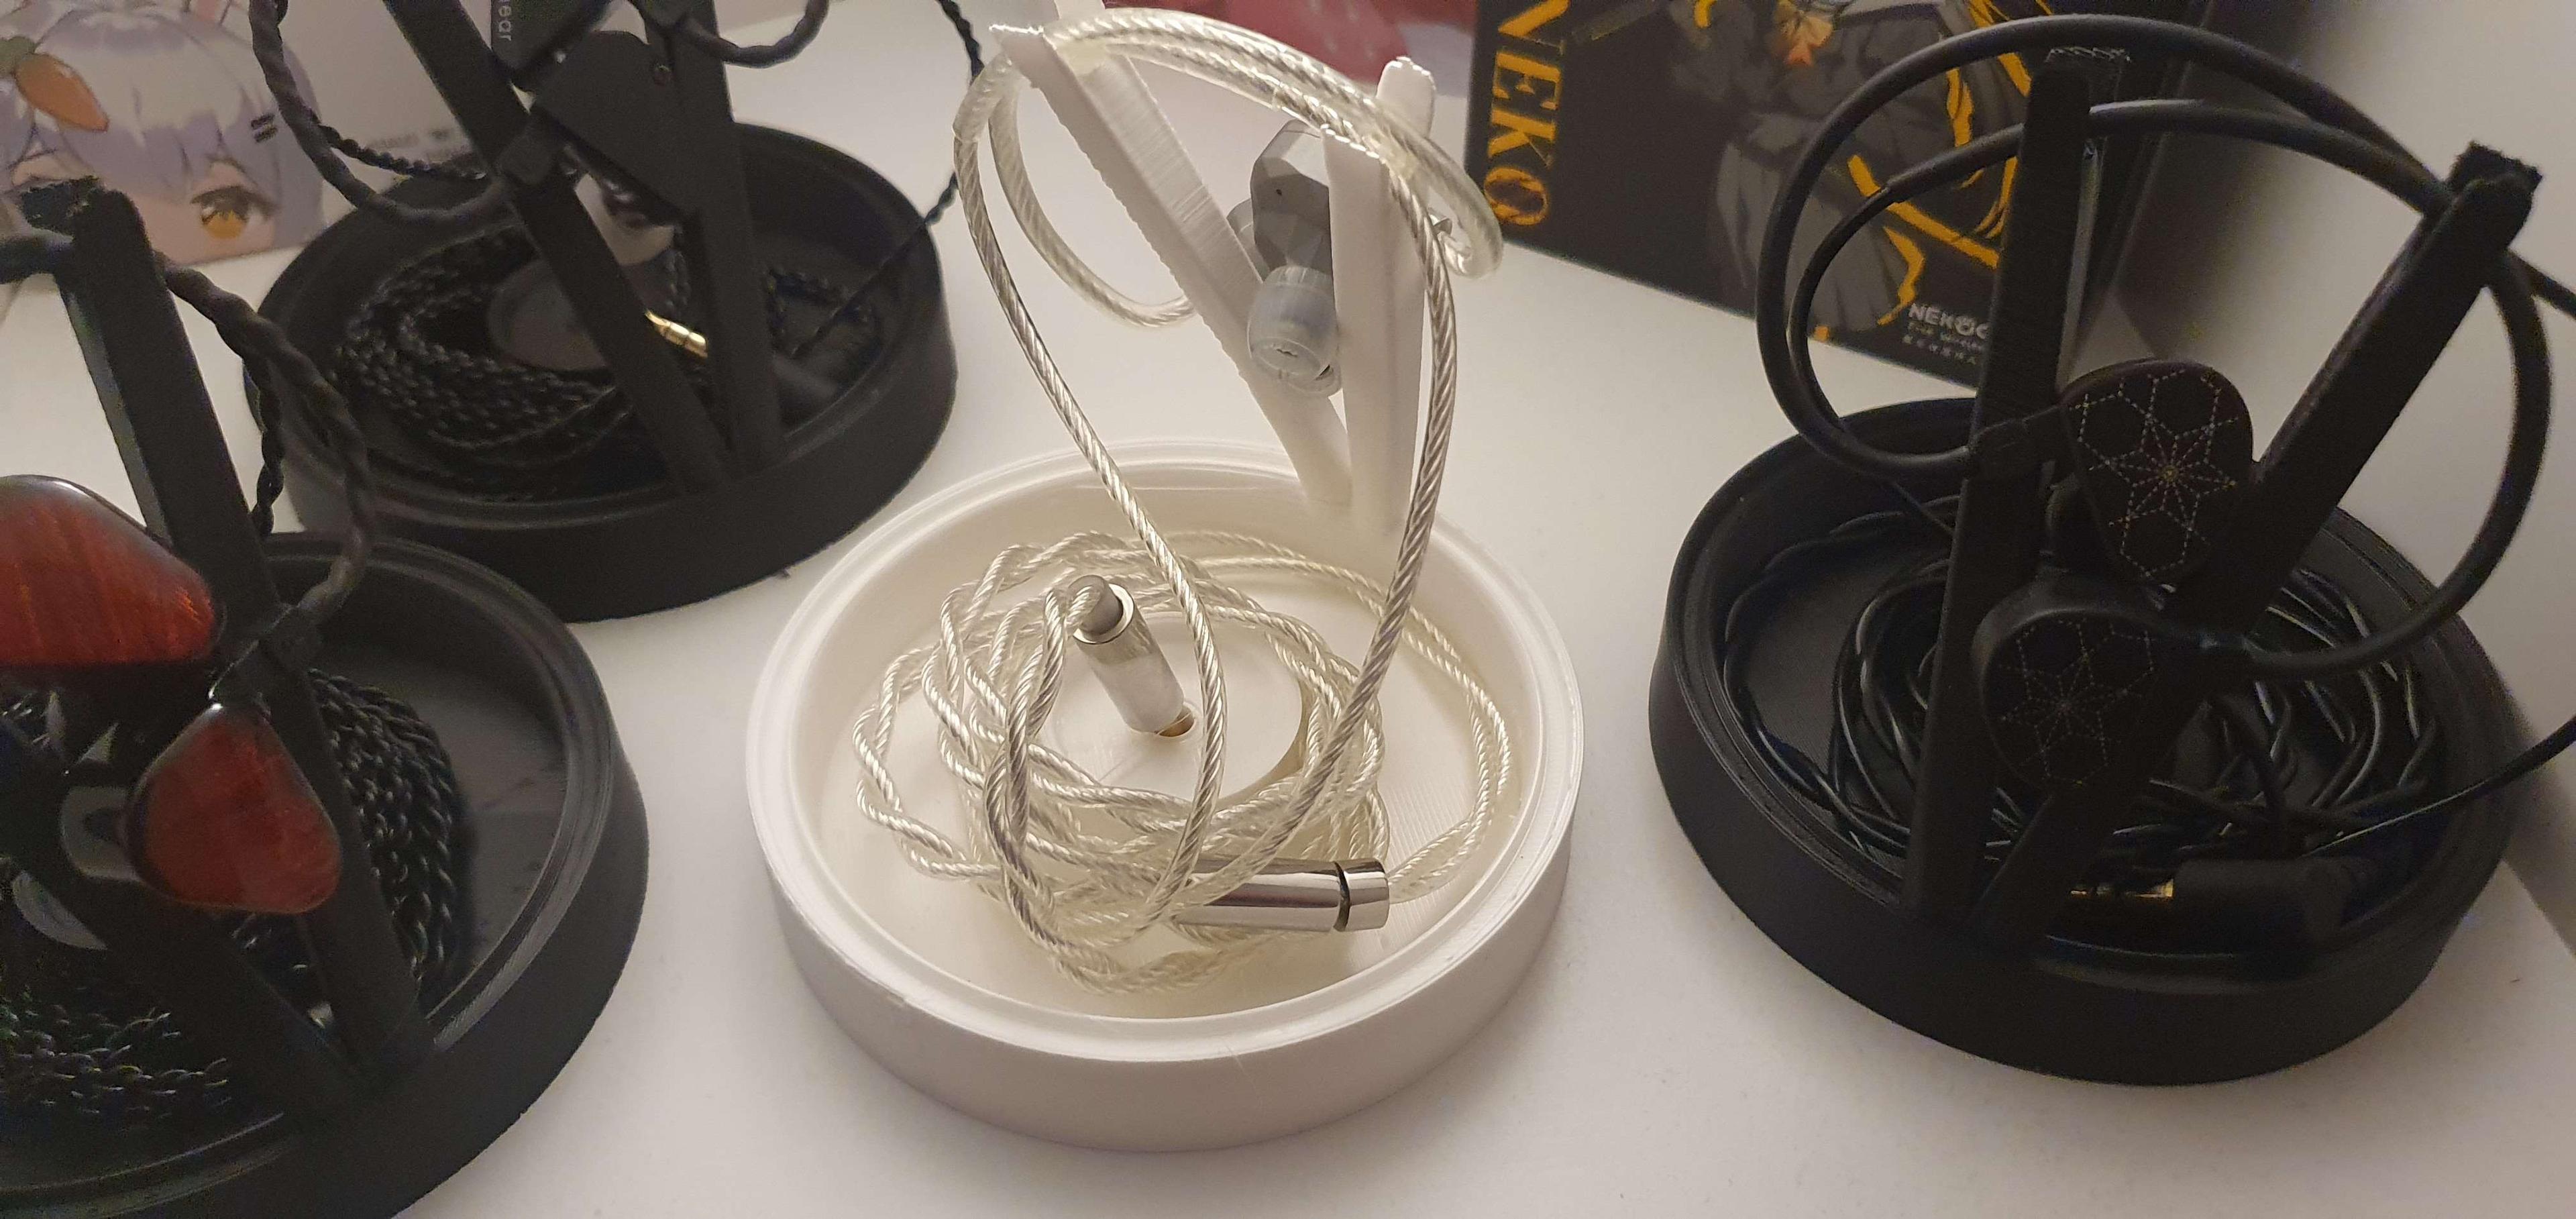 IEM Stand (In-Ear Headphones Stand) 3d model